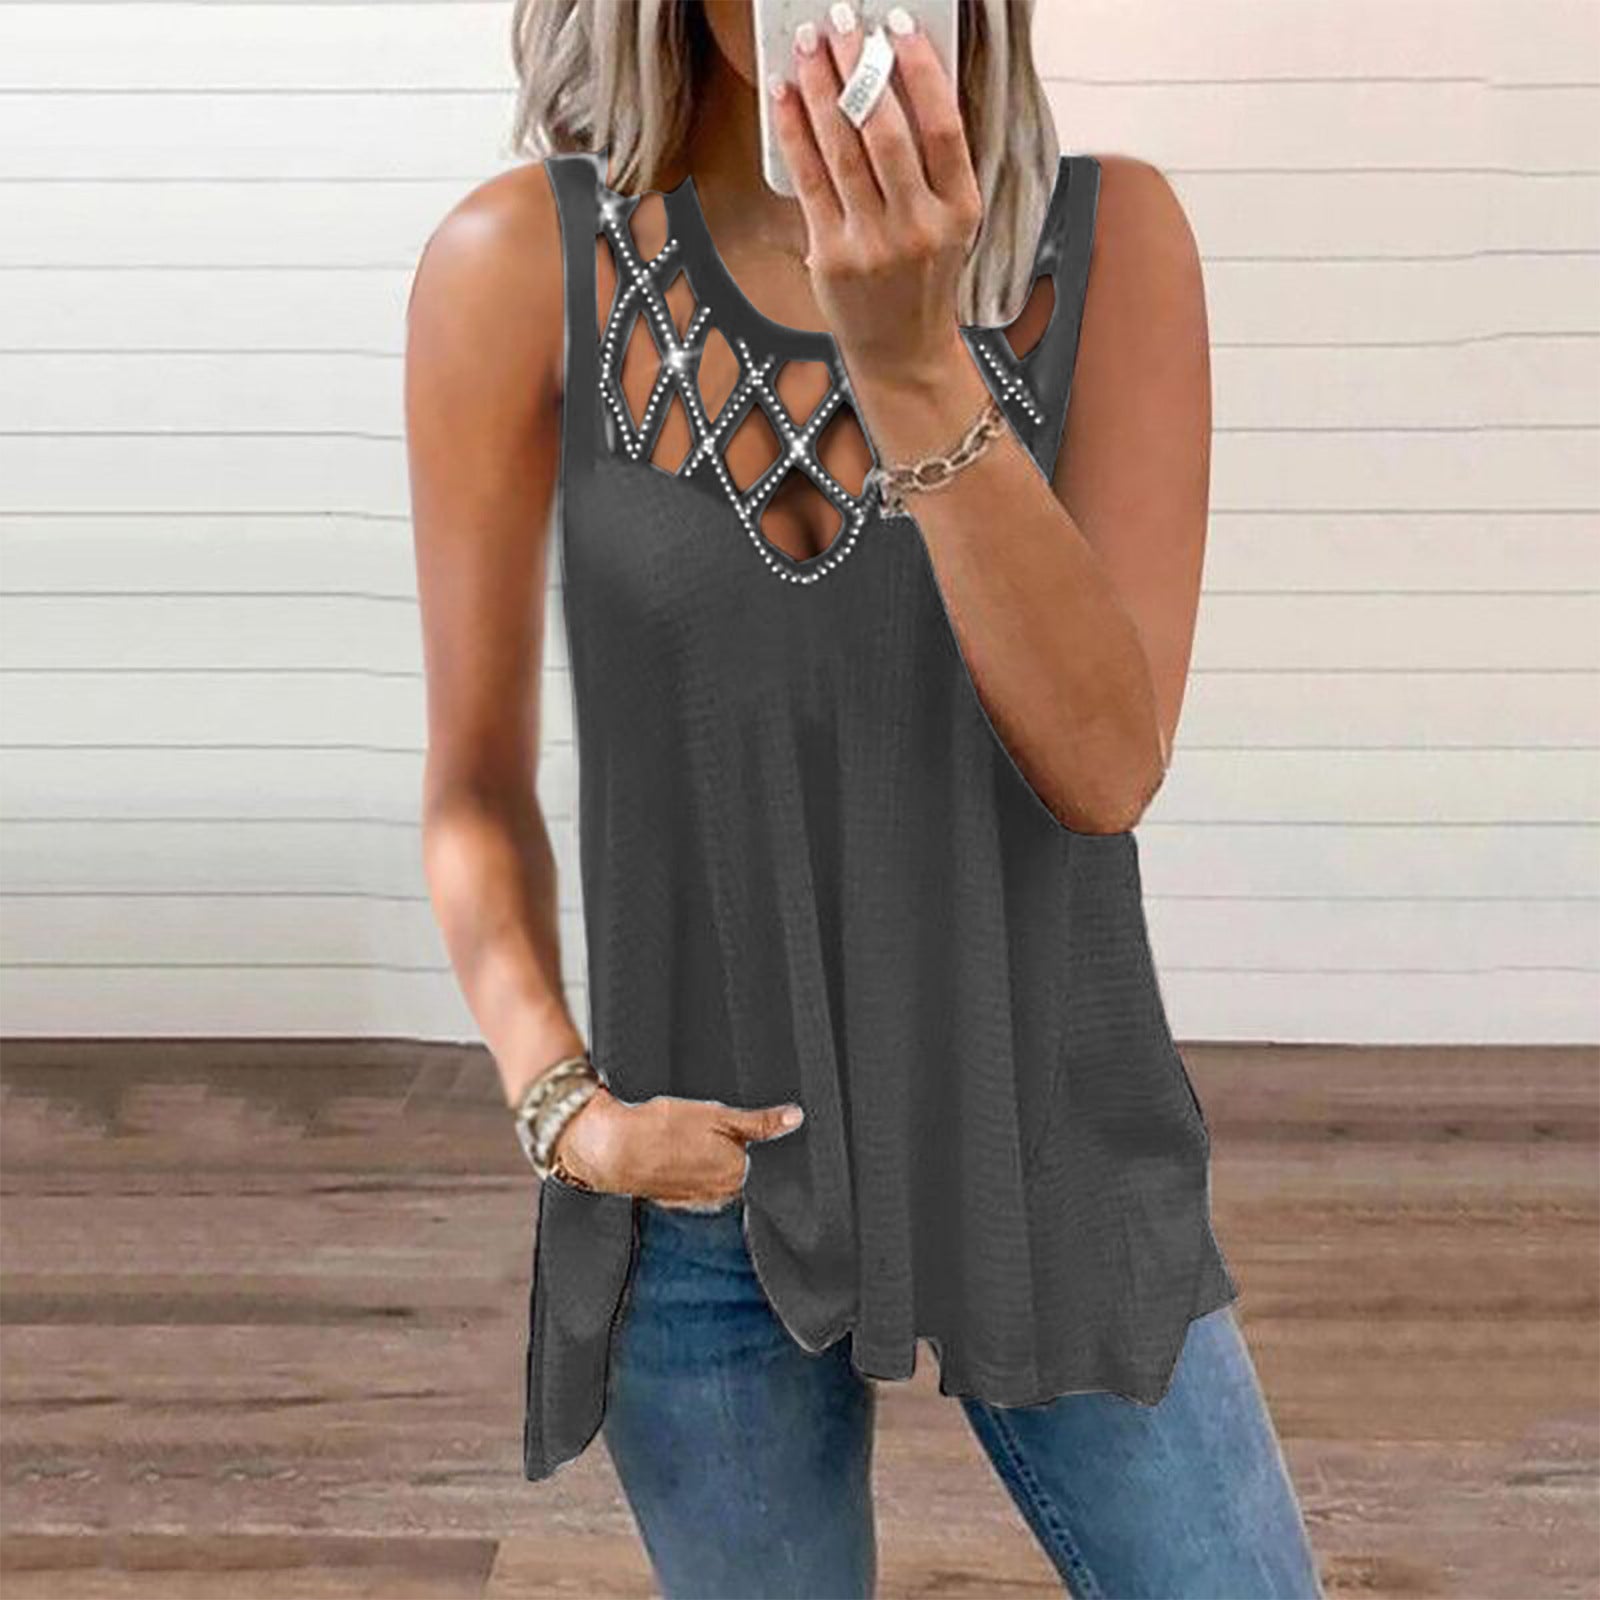 Women's Sexy Rhinestone Sleeveless Solid Color T-shirt Tops